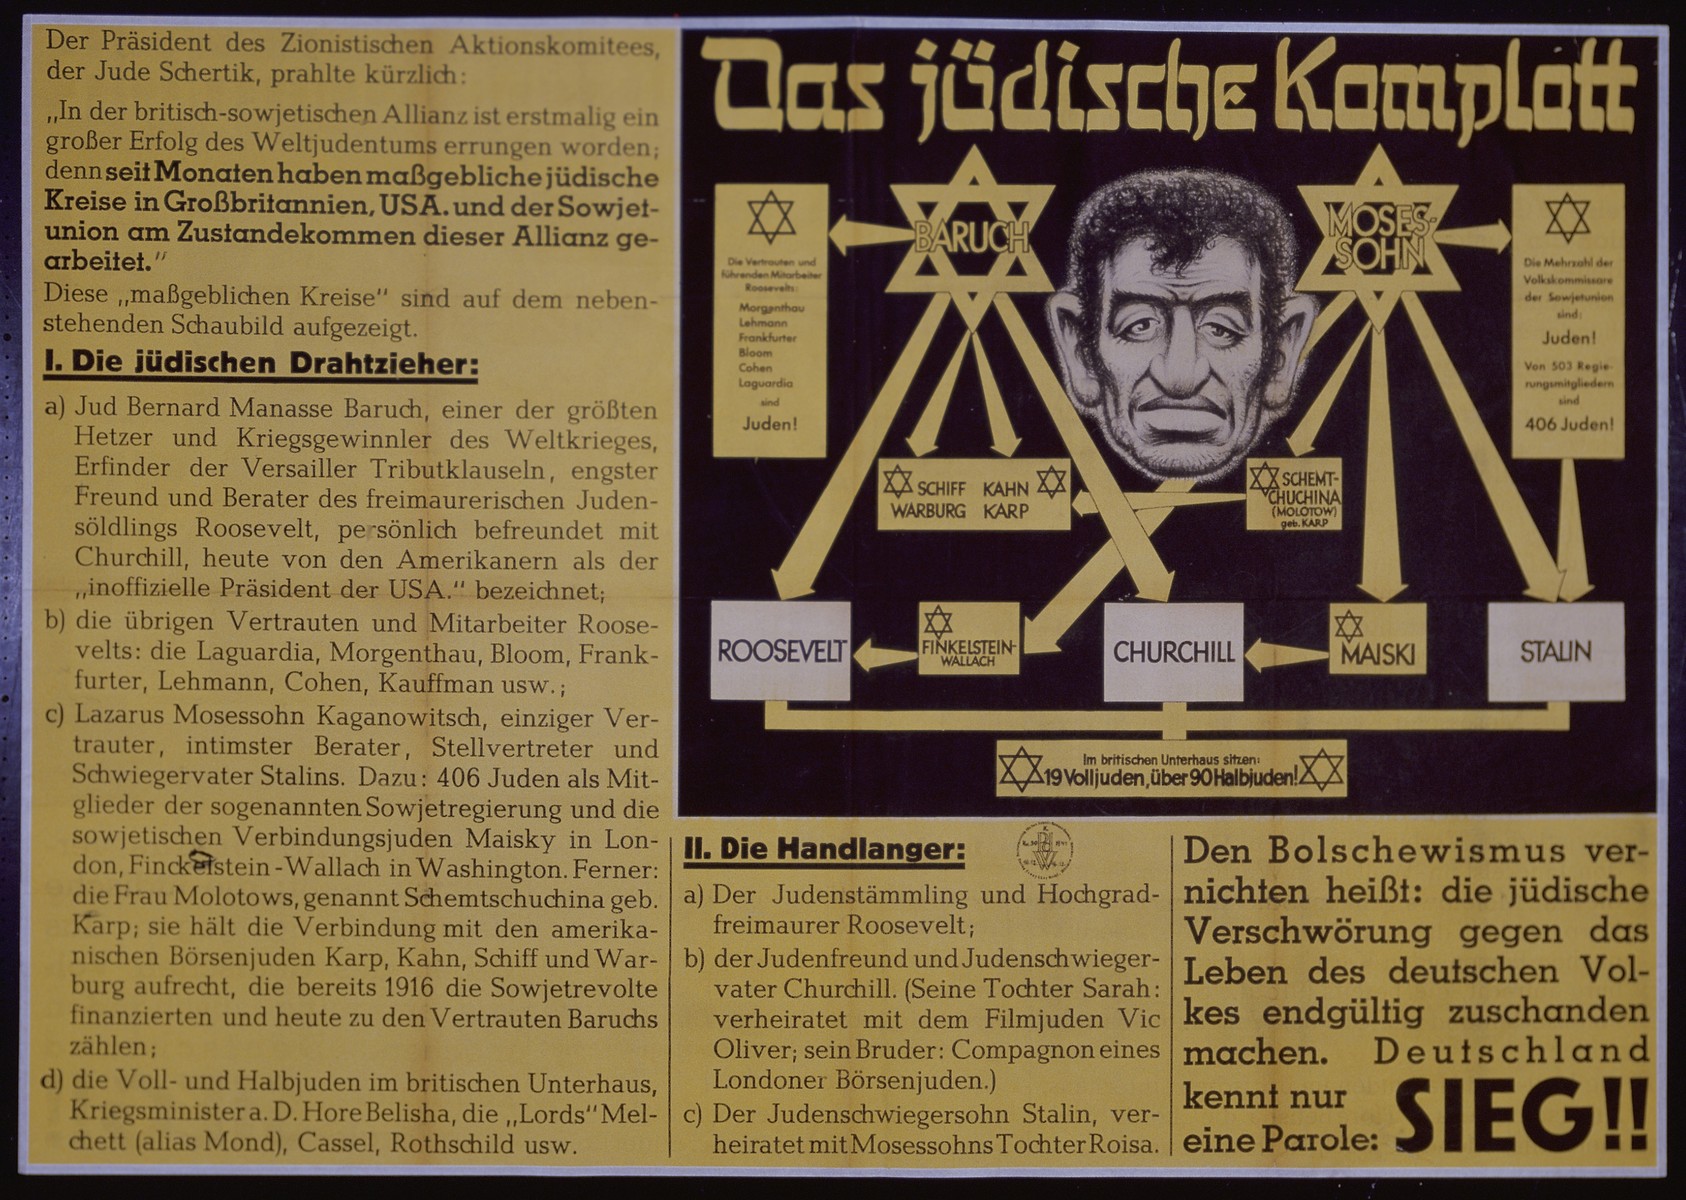 Nazi propaganda poster entitled, "Das judische Komplott" ("The Jewish Conspiracy"), issued by the "Parole der Woche," a wall newspaper (Wandzeitung) published by the National Socialist Party propaganda office in Munich.

The President of the Zionist Action Committee, the Jew Schertik, recently boasted that  "The British-Soviet alliance is the first great victory for the world Jewry, for key Jewish groups in Great Britain, the USA, and the Soviet Union worked on this alliance coming to fruition for months."  These "key groups" are shown on the adjacent diagram.  

1.  The Jewish Puppeteers:
a) The Yid Berhard Masse Baruch, one of the biggest warmongers and profiteers of the [First] World War, originator of the Versailles reparation clause, close friend and advisor of the freemasonic Jew-hireling Roosevelt, personal friend of Churchill, now called the "unofficial President of the USA" by Americans;
b) the rest of the confidentes and associates of Roosevelt: LaGuardia, Morgenthau, Bloom, Frankfurter, Lehmann, Cohen, Kauffman, etc:
c) Lazarus Mossessohn Kaganovich, sole confidante and most intimate advisor, agent, and father-in-law of Stalin.  Additionally, four hundred and six Jews are members of the so-called Soviet regime and the Soviet Jewish contacts Maisky, in London, and Finckelstein-Wallach, in Washington.  Futhermore, Molotov's wife called "Zhemchuzhina," was born [with the surname] "Karp."  She maintains contact with the America Jew Stock brokers Karp, Kahn, Schiff, and Warburg, who financed the Soviet revolution in 1916 and who today are close with Baruch;
d) the "full" and "half" Jews in the British House of Commons, former Secretay of State for War Hore Belisha, the "Lords" Melchett (alias mond), Cassel, Rothschild, etc.
II.  The Henchmen
a) Roosevelt, a Jewish descendant and high-grade Freemason;
b)  Churchill, the Jew lover and father-in-law of a Jew.
c) Stalin, the son-in-law of a Jew, who married to Mosessohn's daughter Rosa (Kaganovich).

To destroy Bolshevism means to destroy the Jewish plot against the existance of the German Volk once and for all.  Germany knows only one slogan:  Victory!
The Confidantes and leading associates of Roosevelt:
Morgenthau
Lehmann
Frankfurter
Bloom
Cohen
Laguardia
are Jews!
The majority of the People's Commissars of the USSR are: Jews!
Out of five humdred and three [commissars] there are Four hundred and six Jews!
In the British House of Commons there are:  Nineteen Jews and over ninety "Half-Jews!"